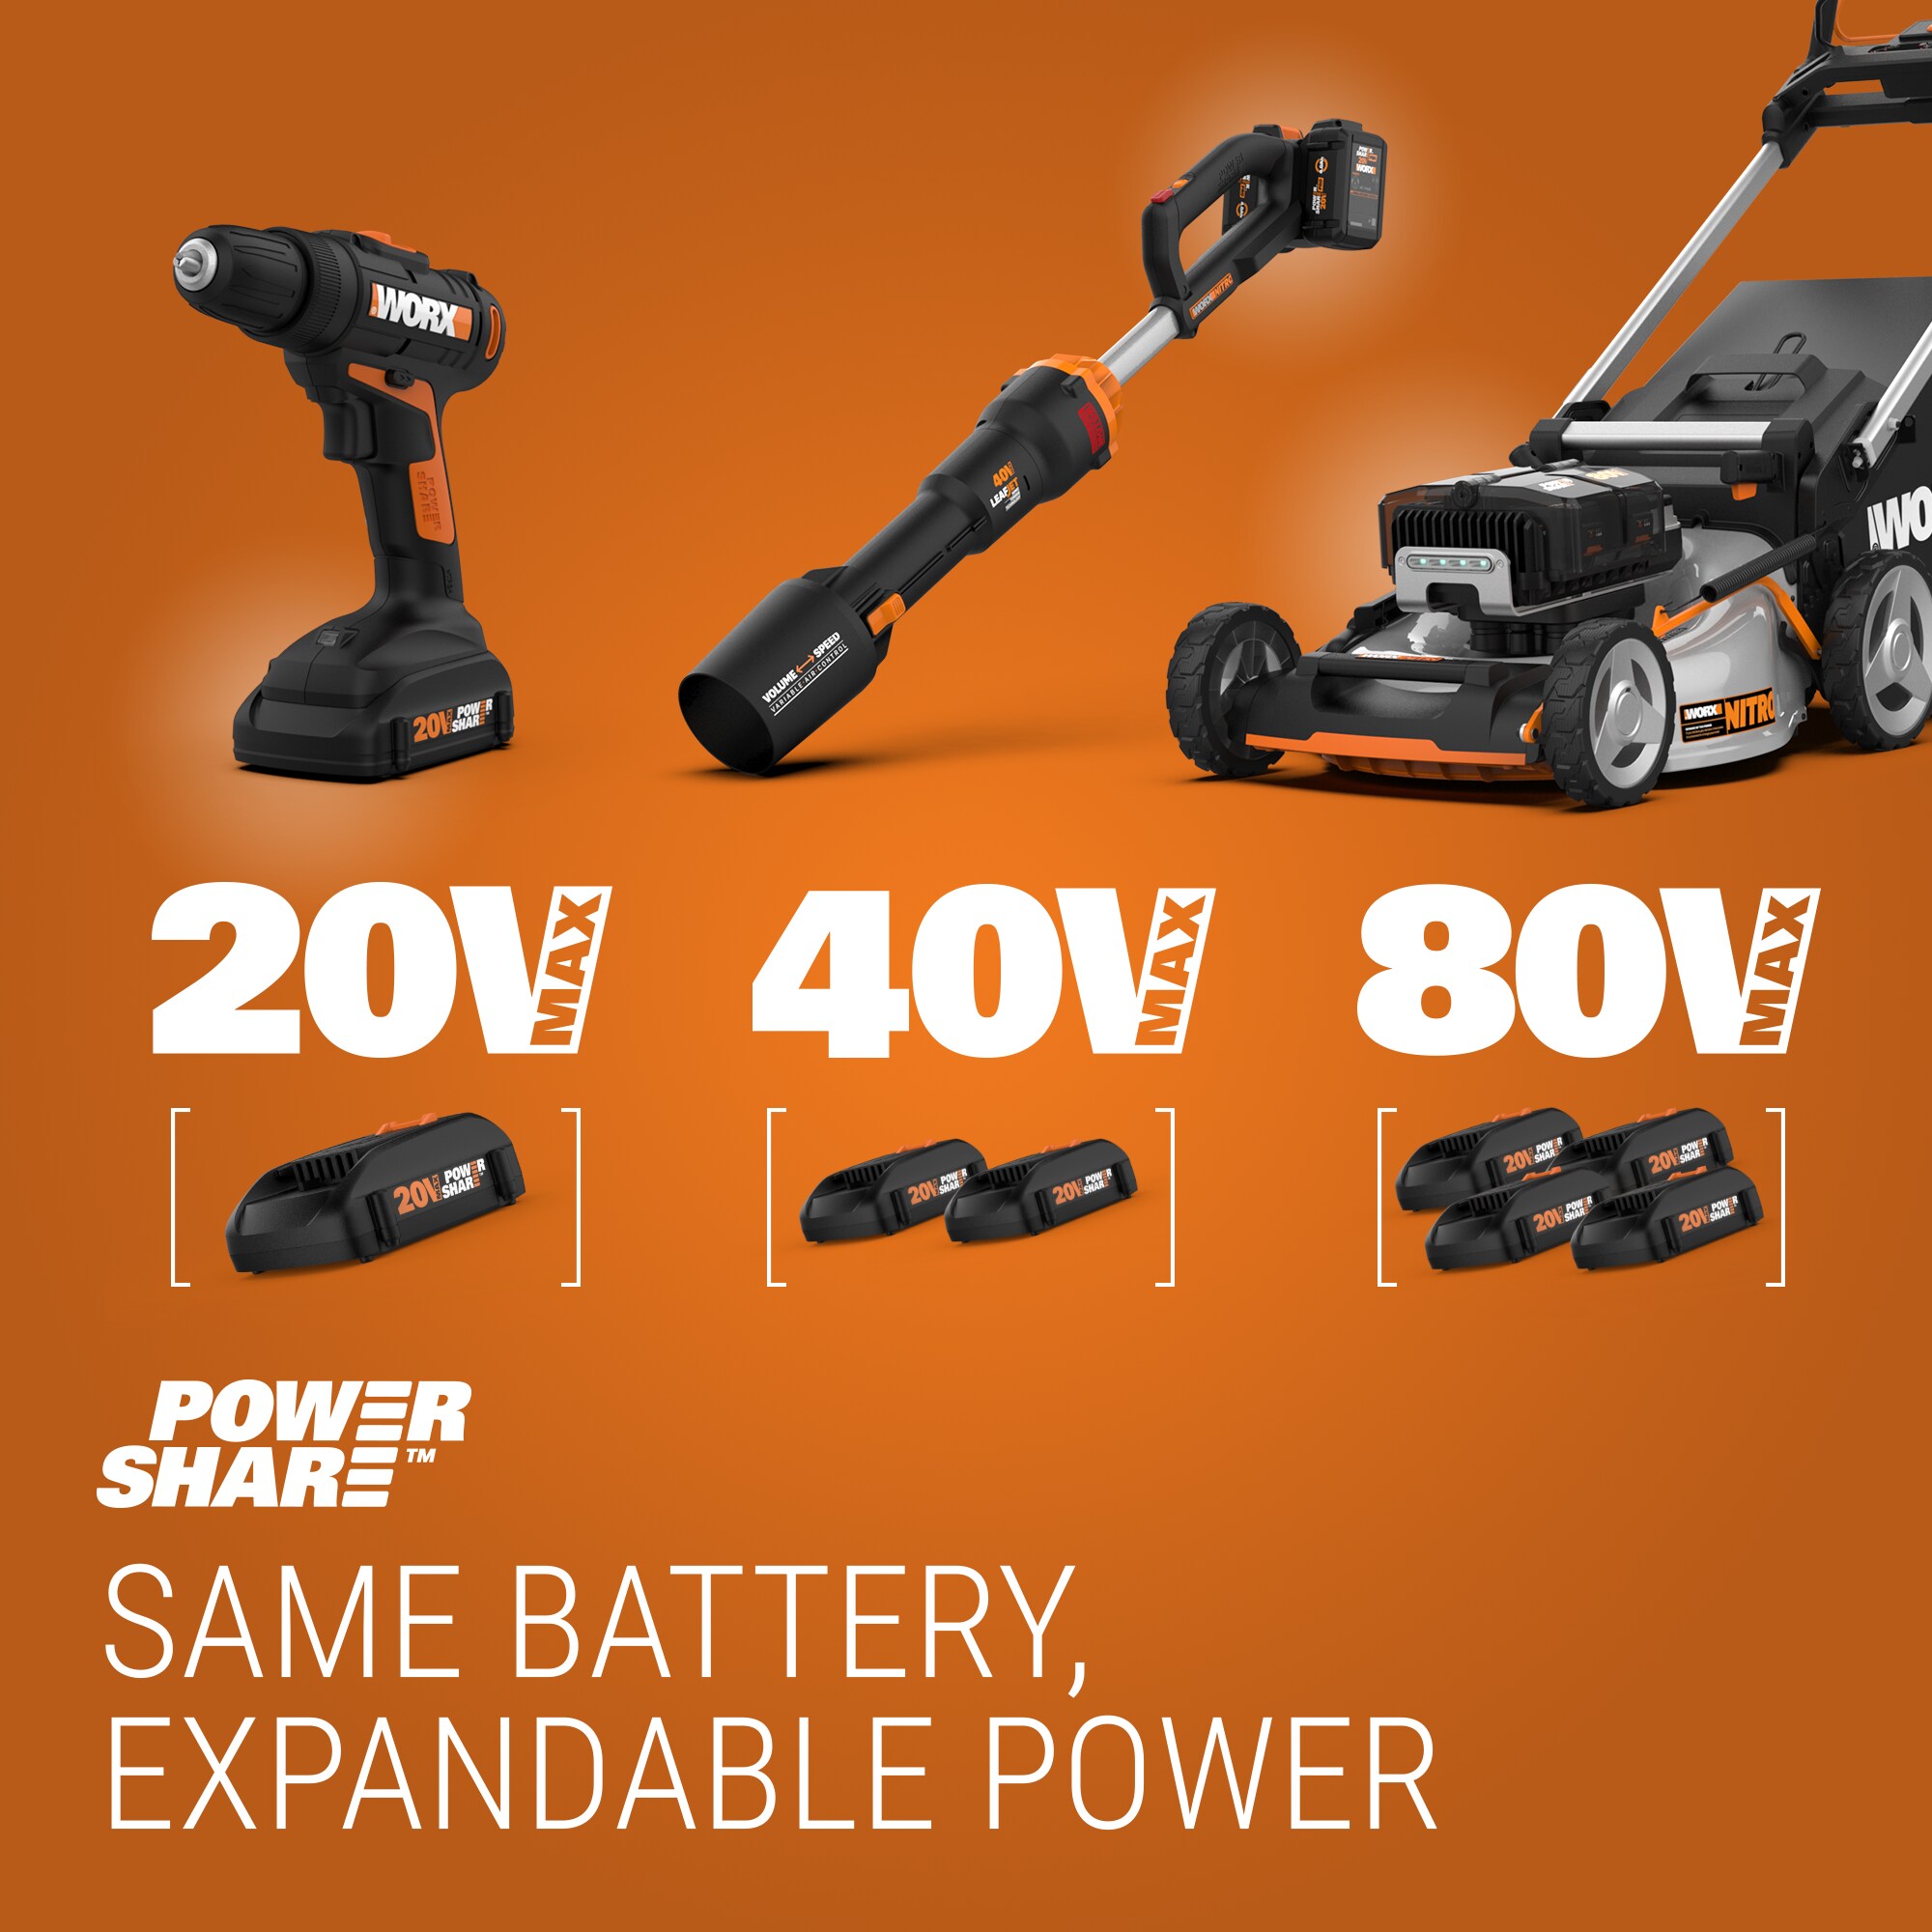 https://discounttoday.net/wp-content/uploads/2022/10/WORX-WG163.10-Gt-Power-Share-20-volt-Max-12-in-Straight-Cordless-String-Trimmer-Edger-Capable-Battery-Included12.jpg